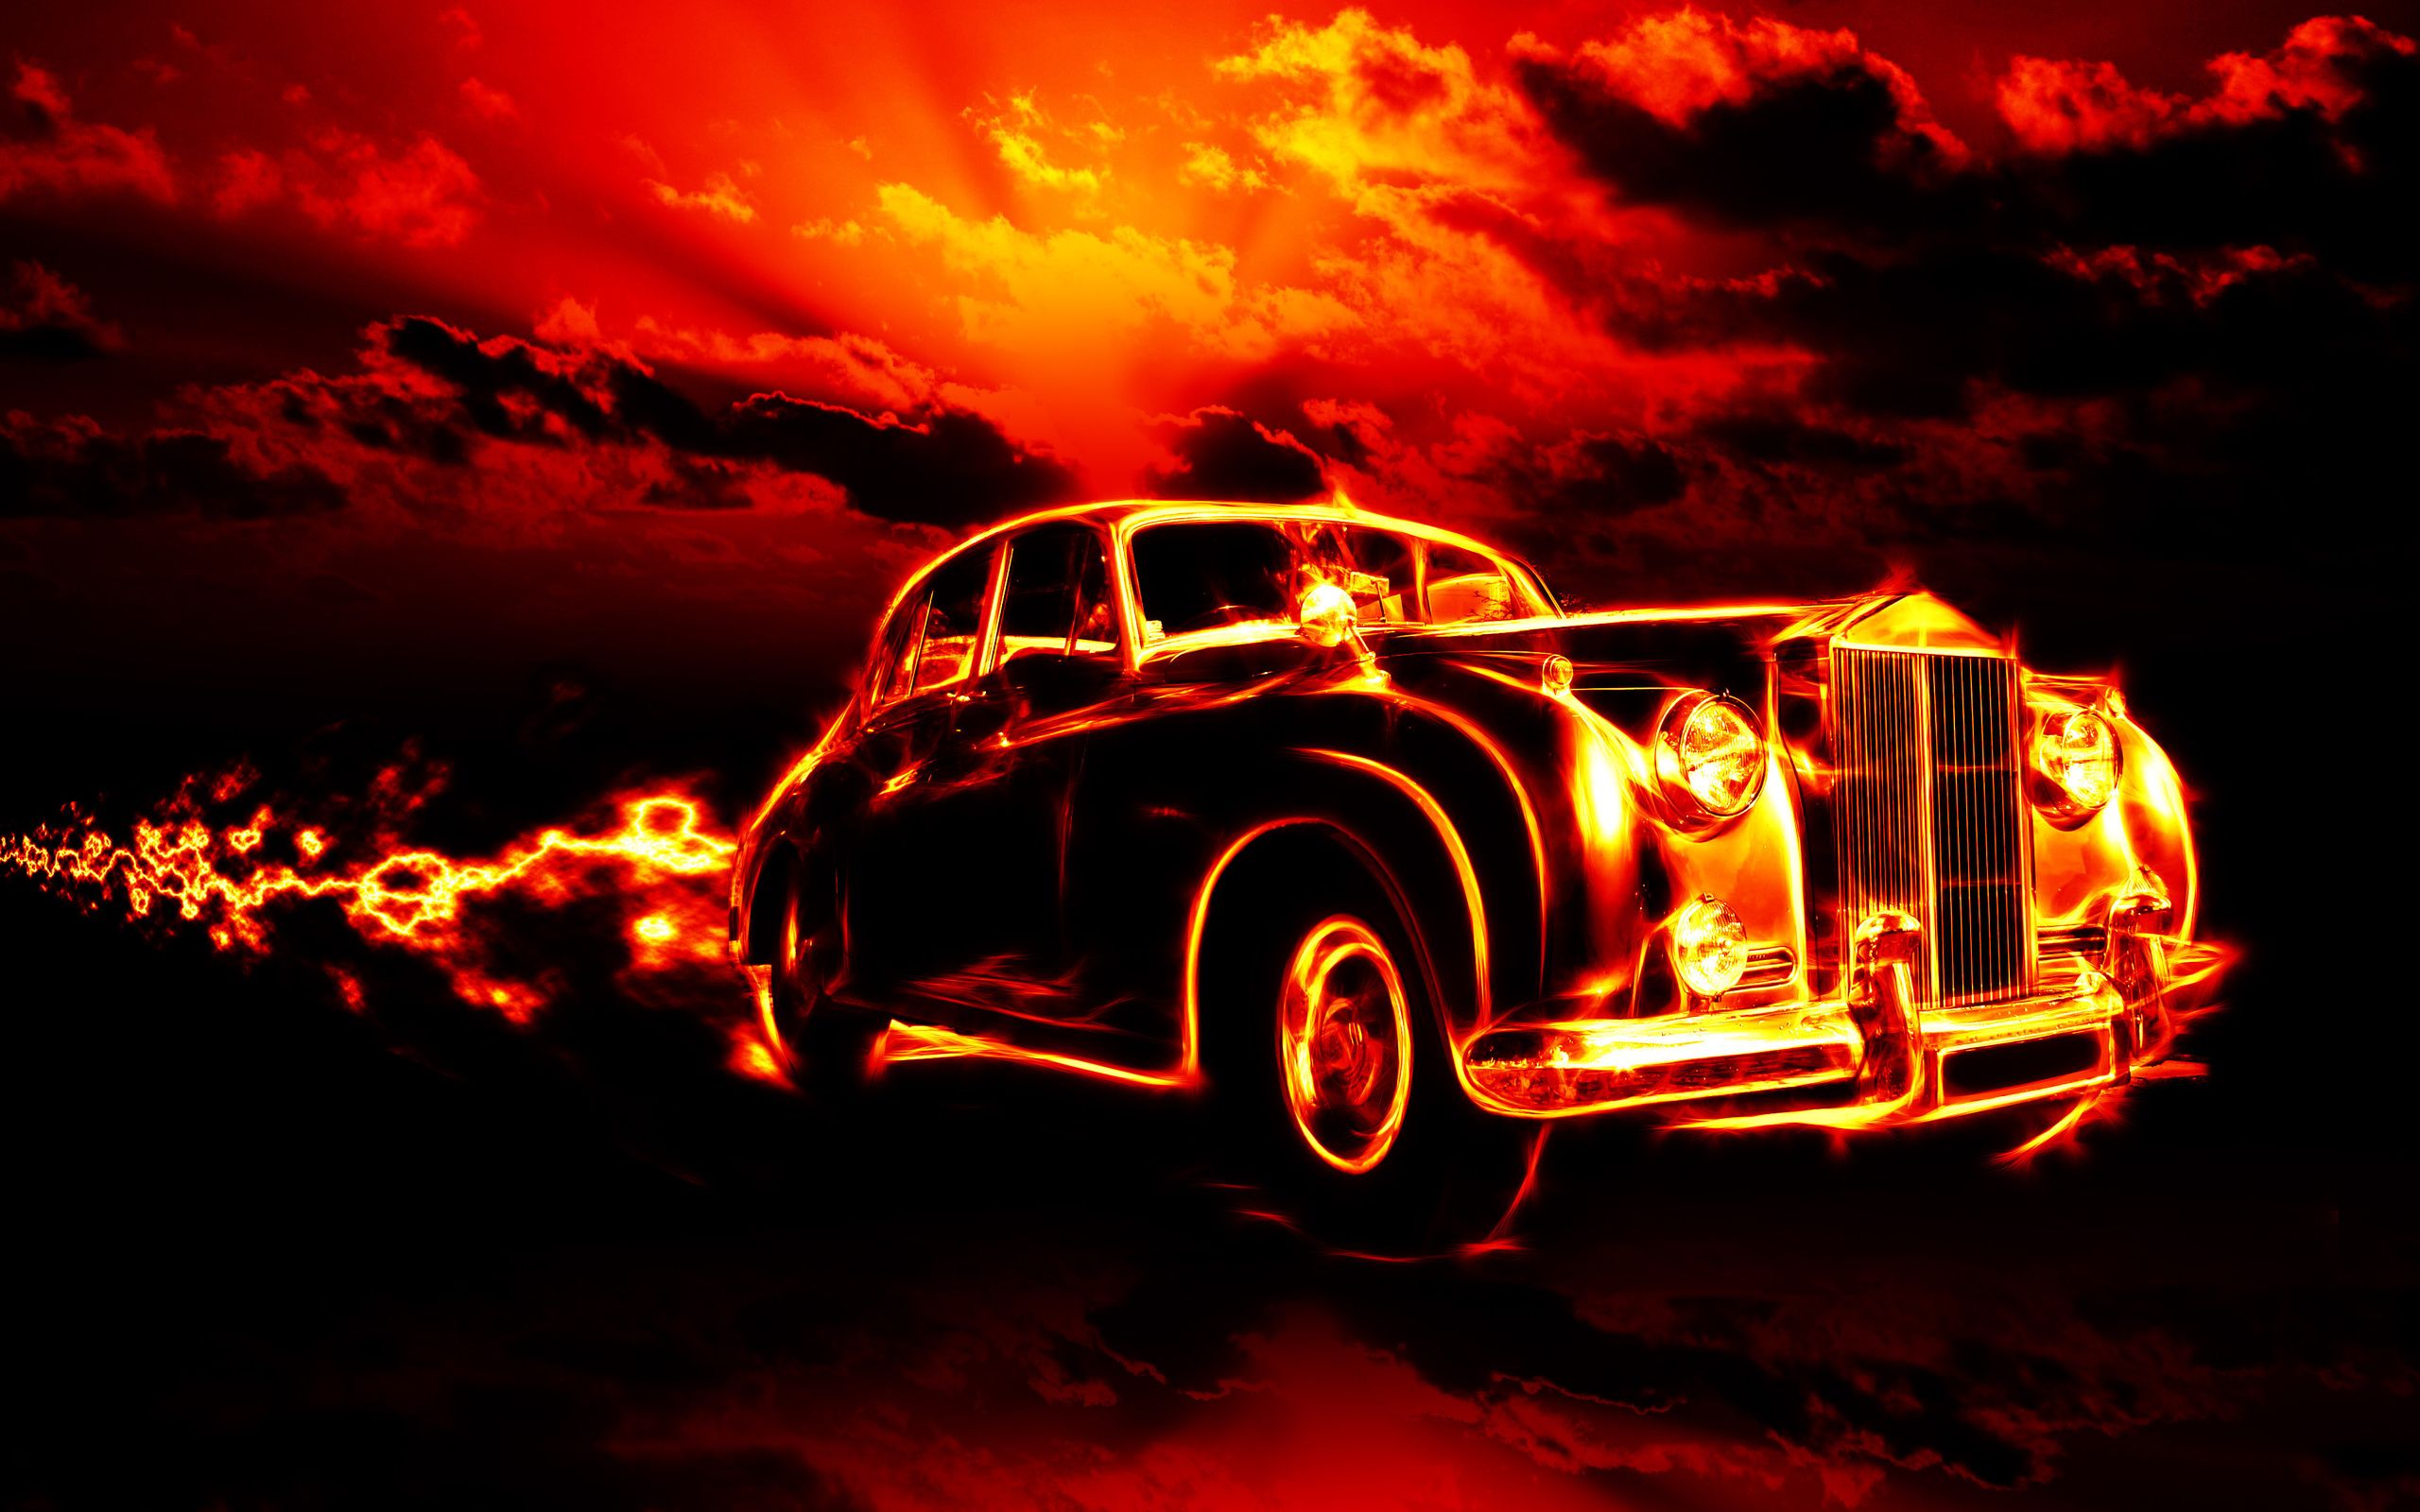 2560x1600 creepy, fire, flame, hell, ghost rider, city, clouds ...